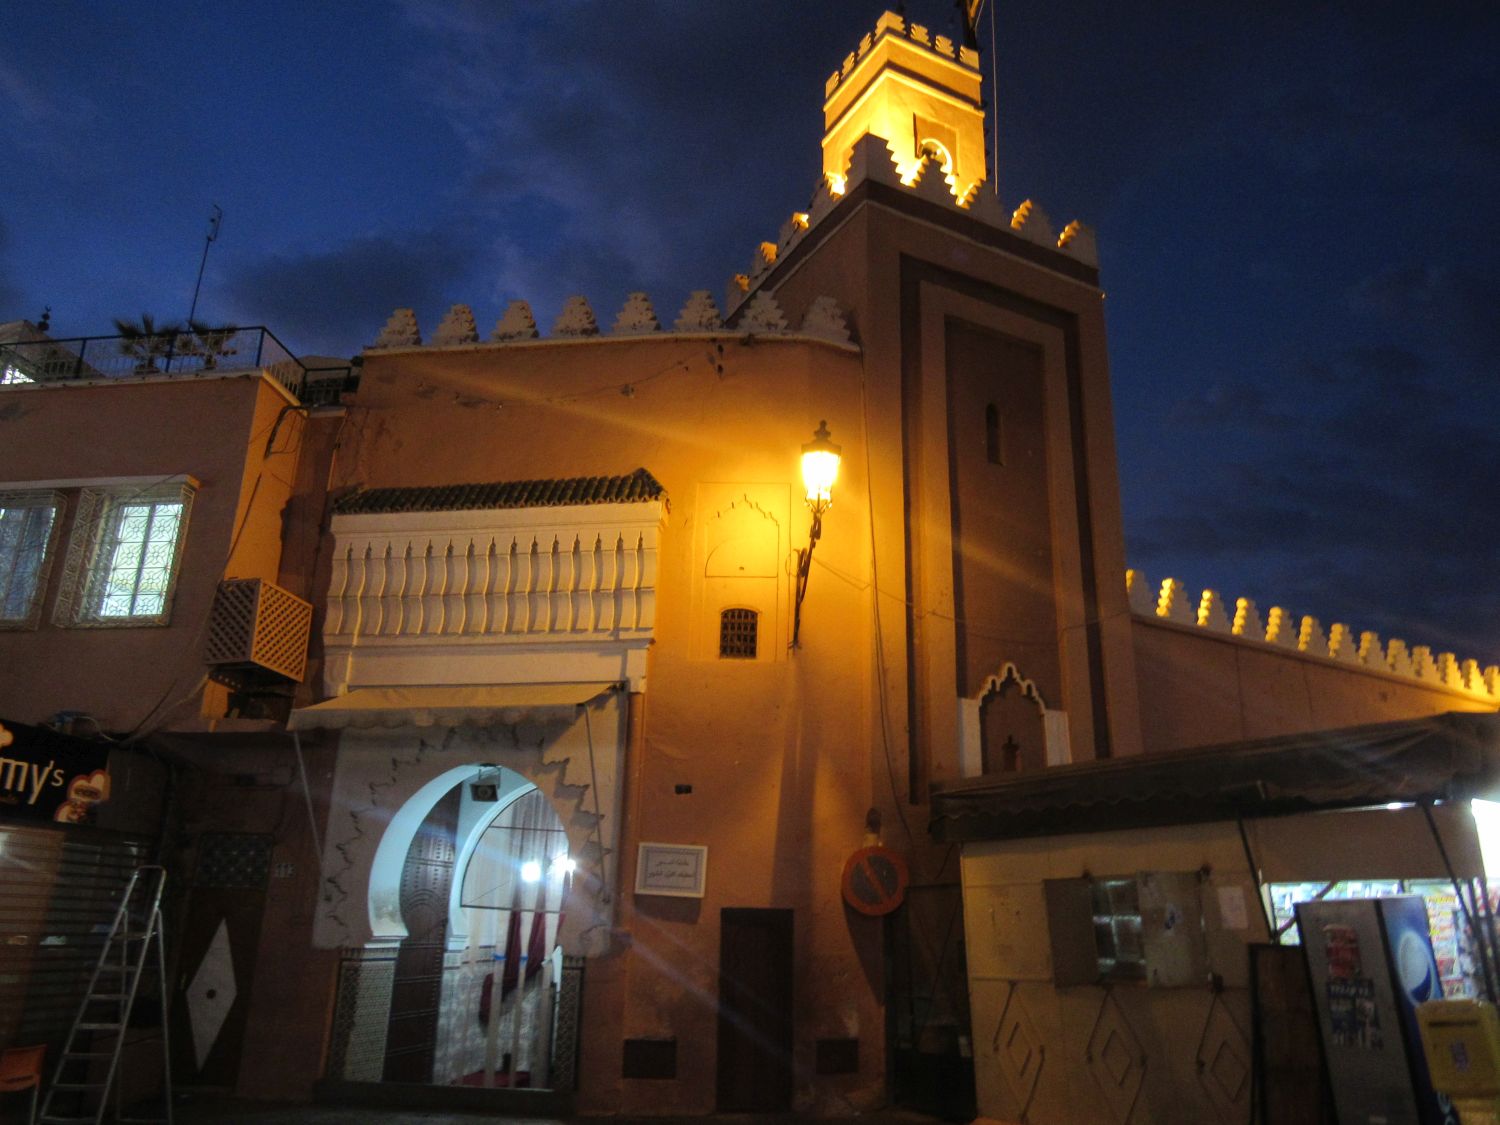 Noctural view of the minaret and portal